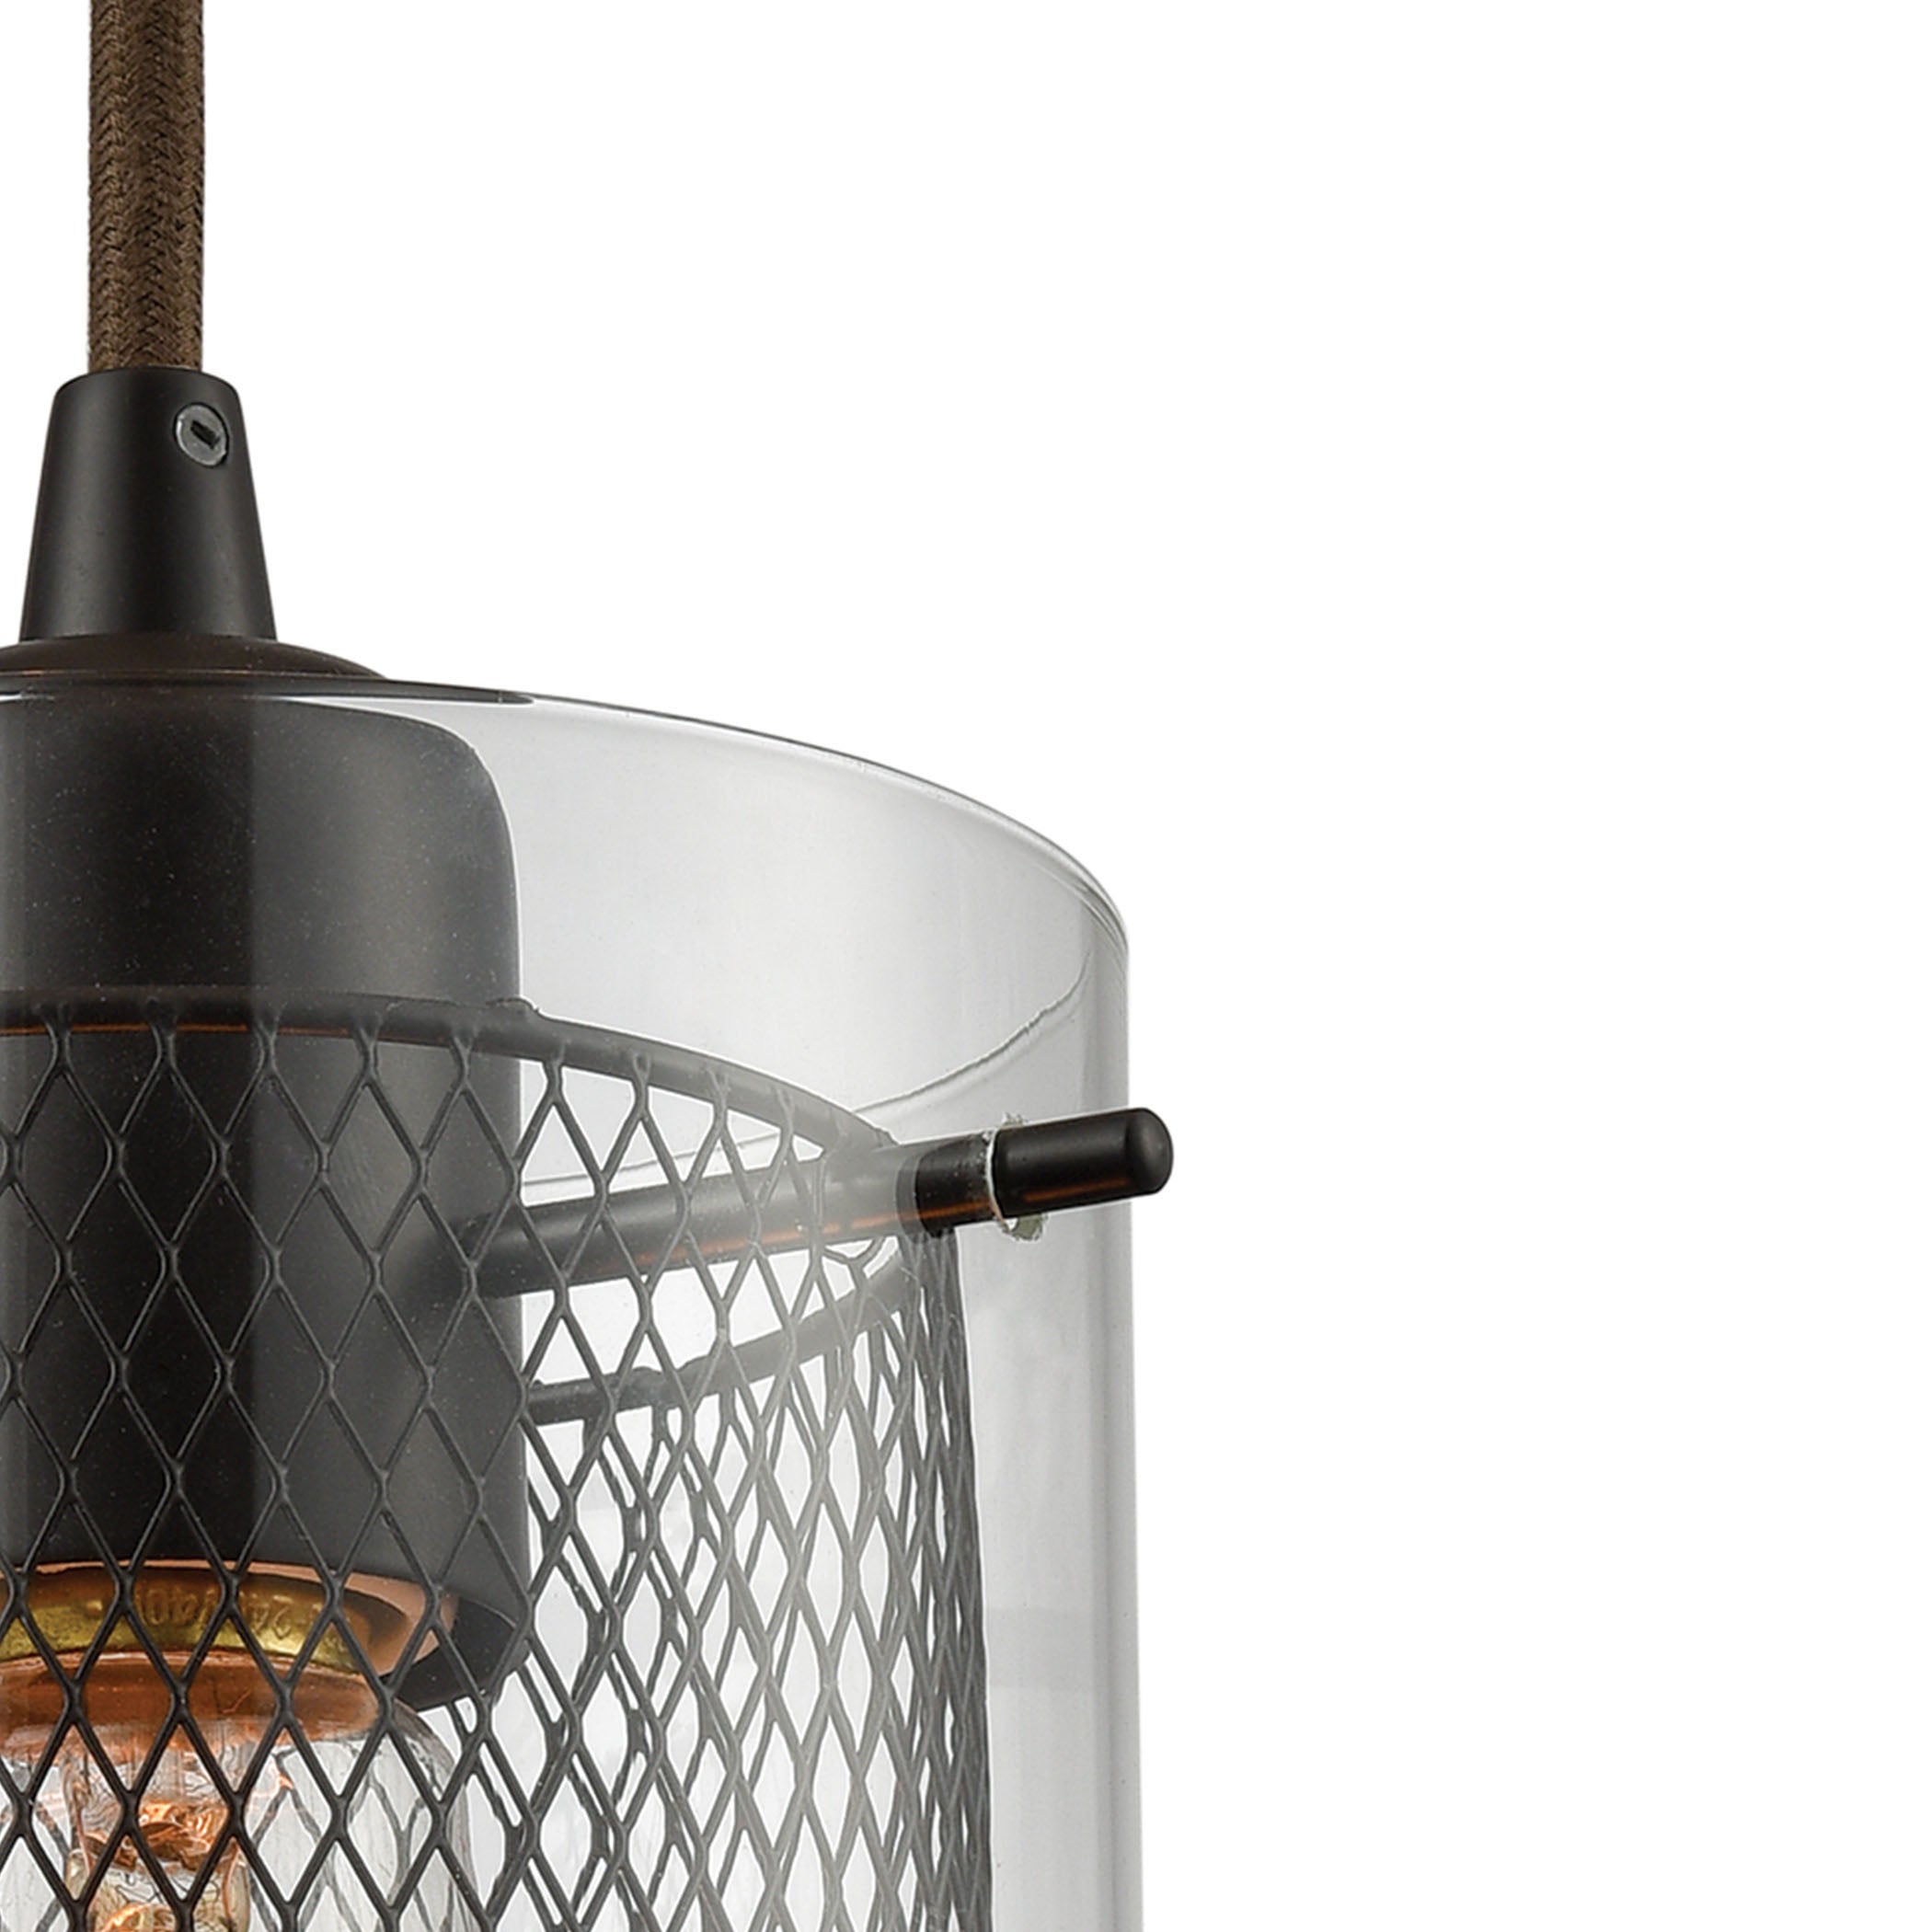 ELK Lighting 10448/1 Brant 1-Light Mini Pendant in Oiled Bronze with Clear Glass and Metal Fishnet Shade